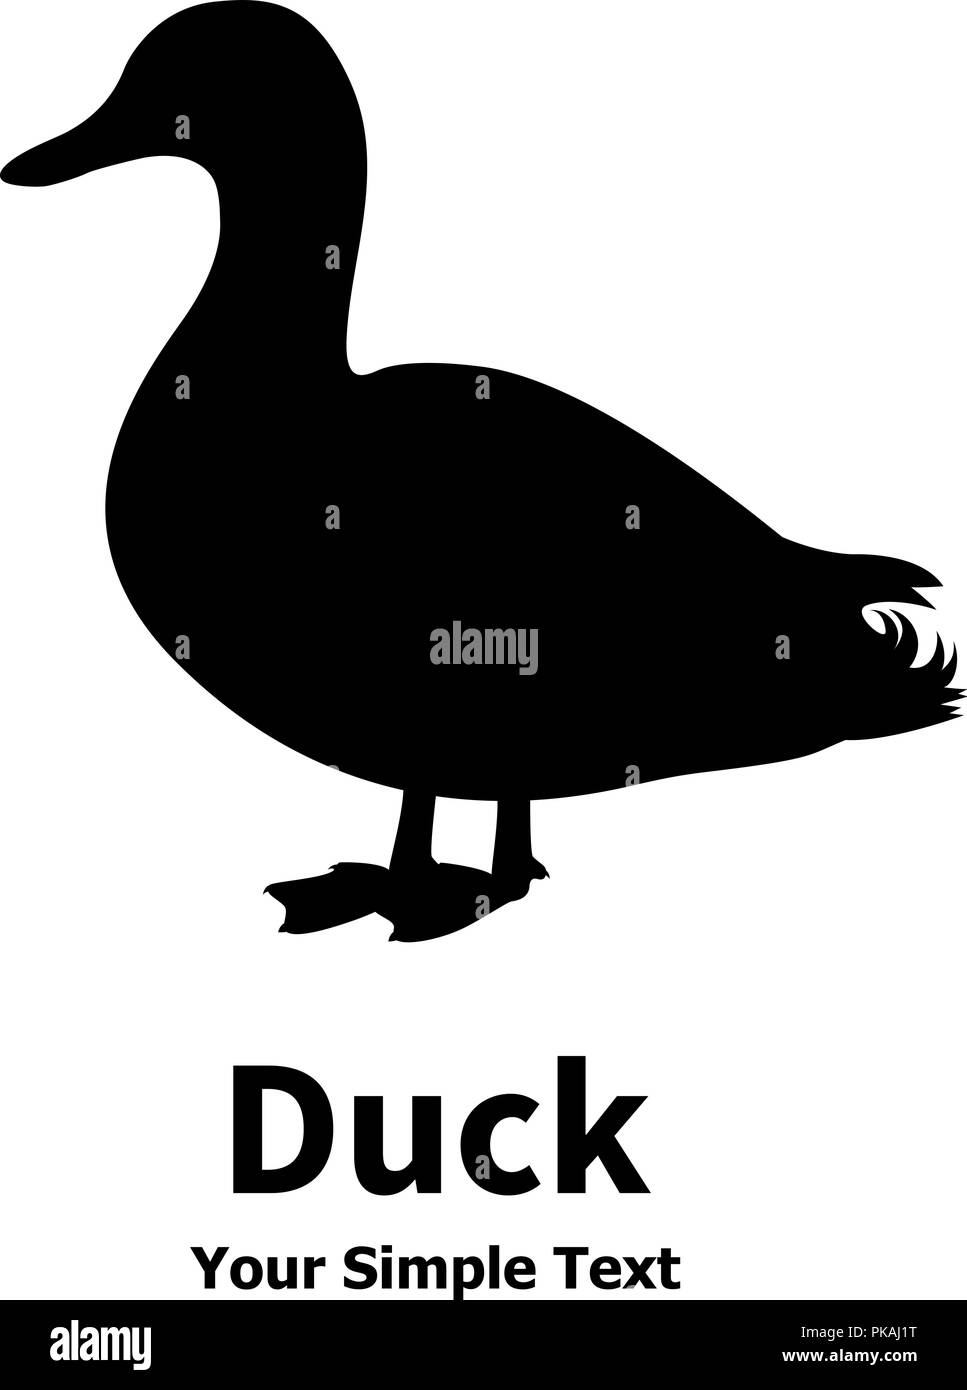 Vector illustration of a silhouette of a duck Stock Vector